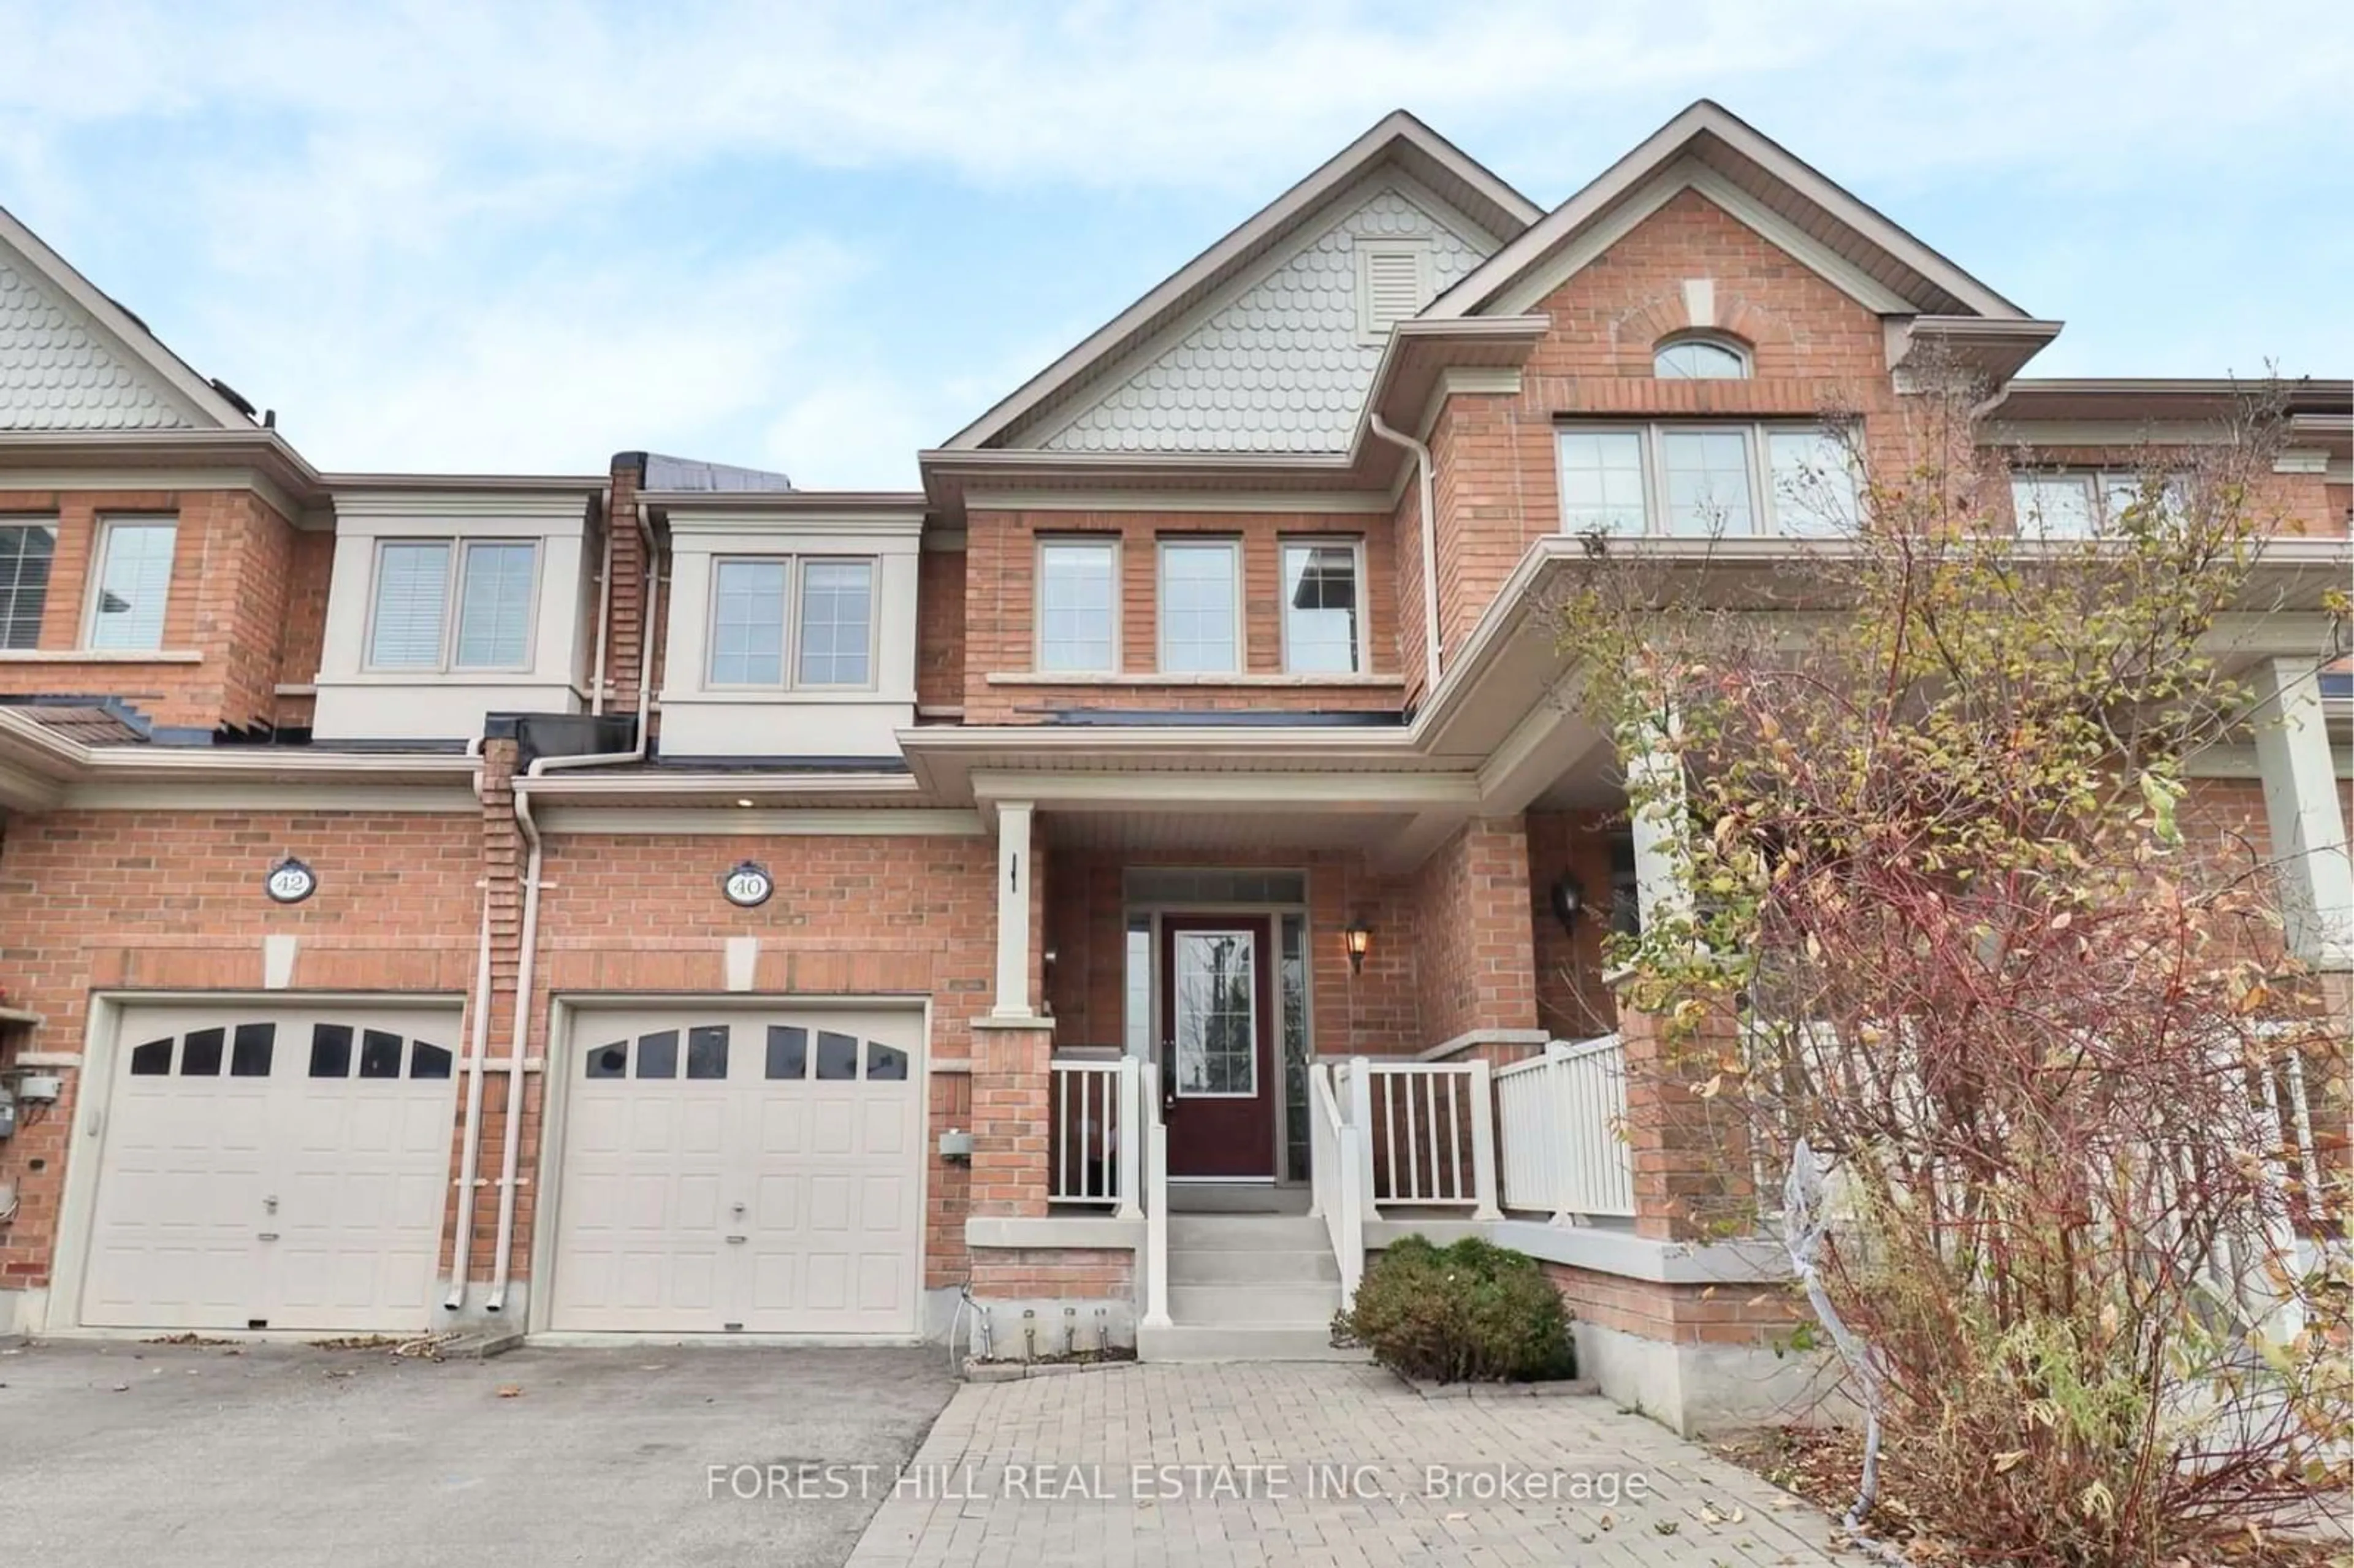 Home with brick exterior material for 40 Whitmer St, Milton Ontario L9T 0R5